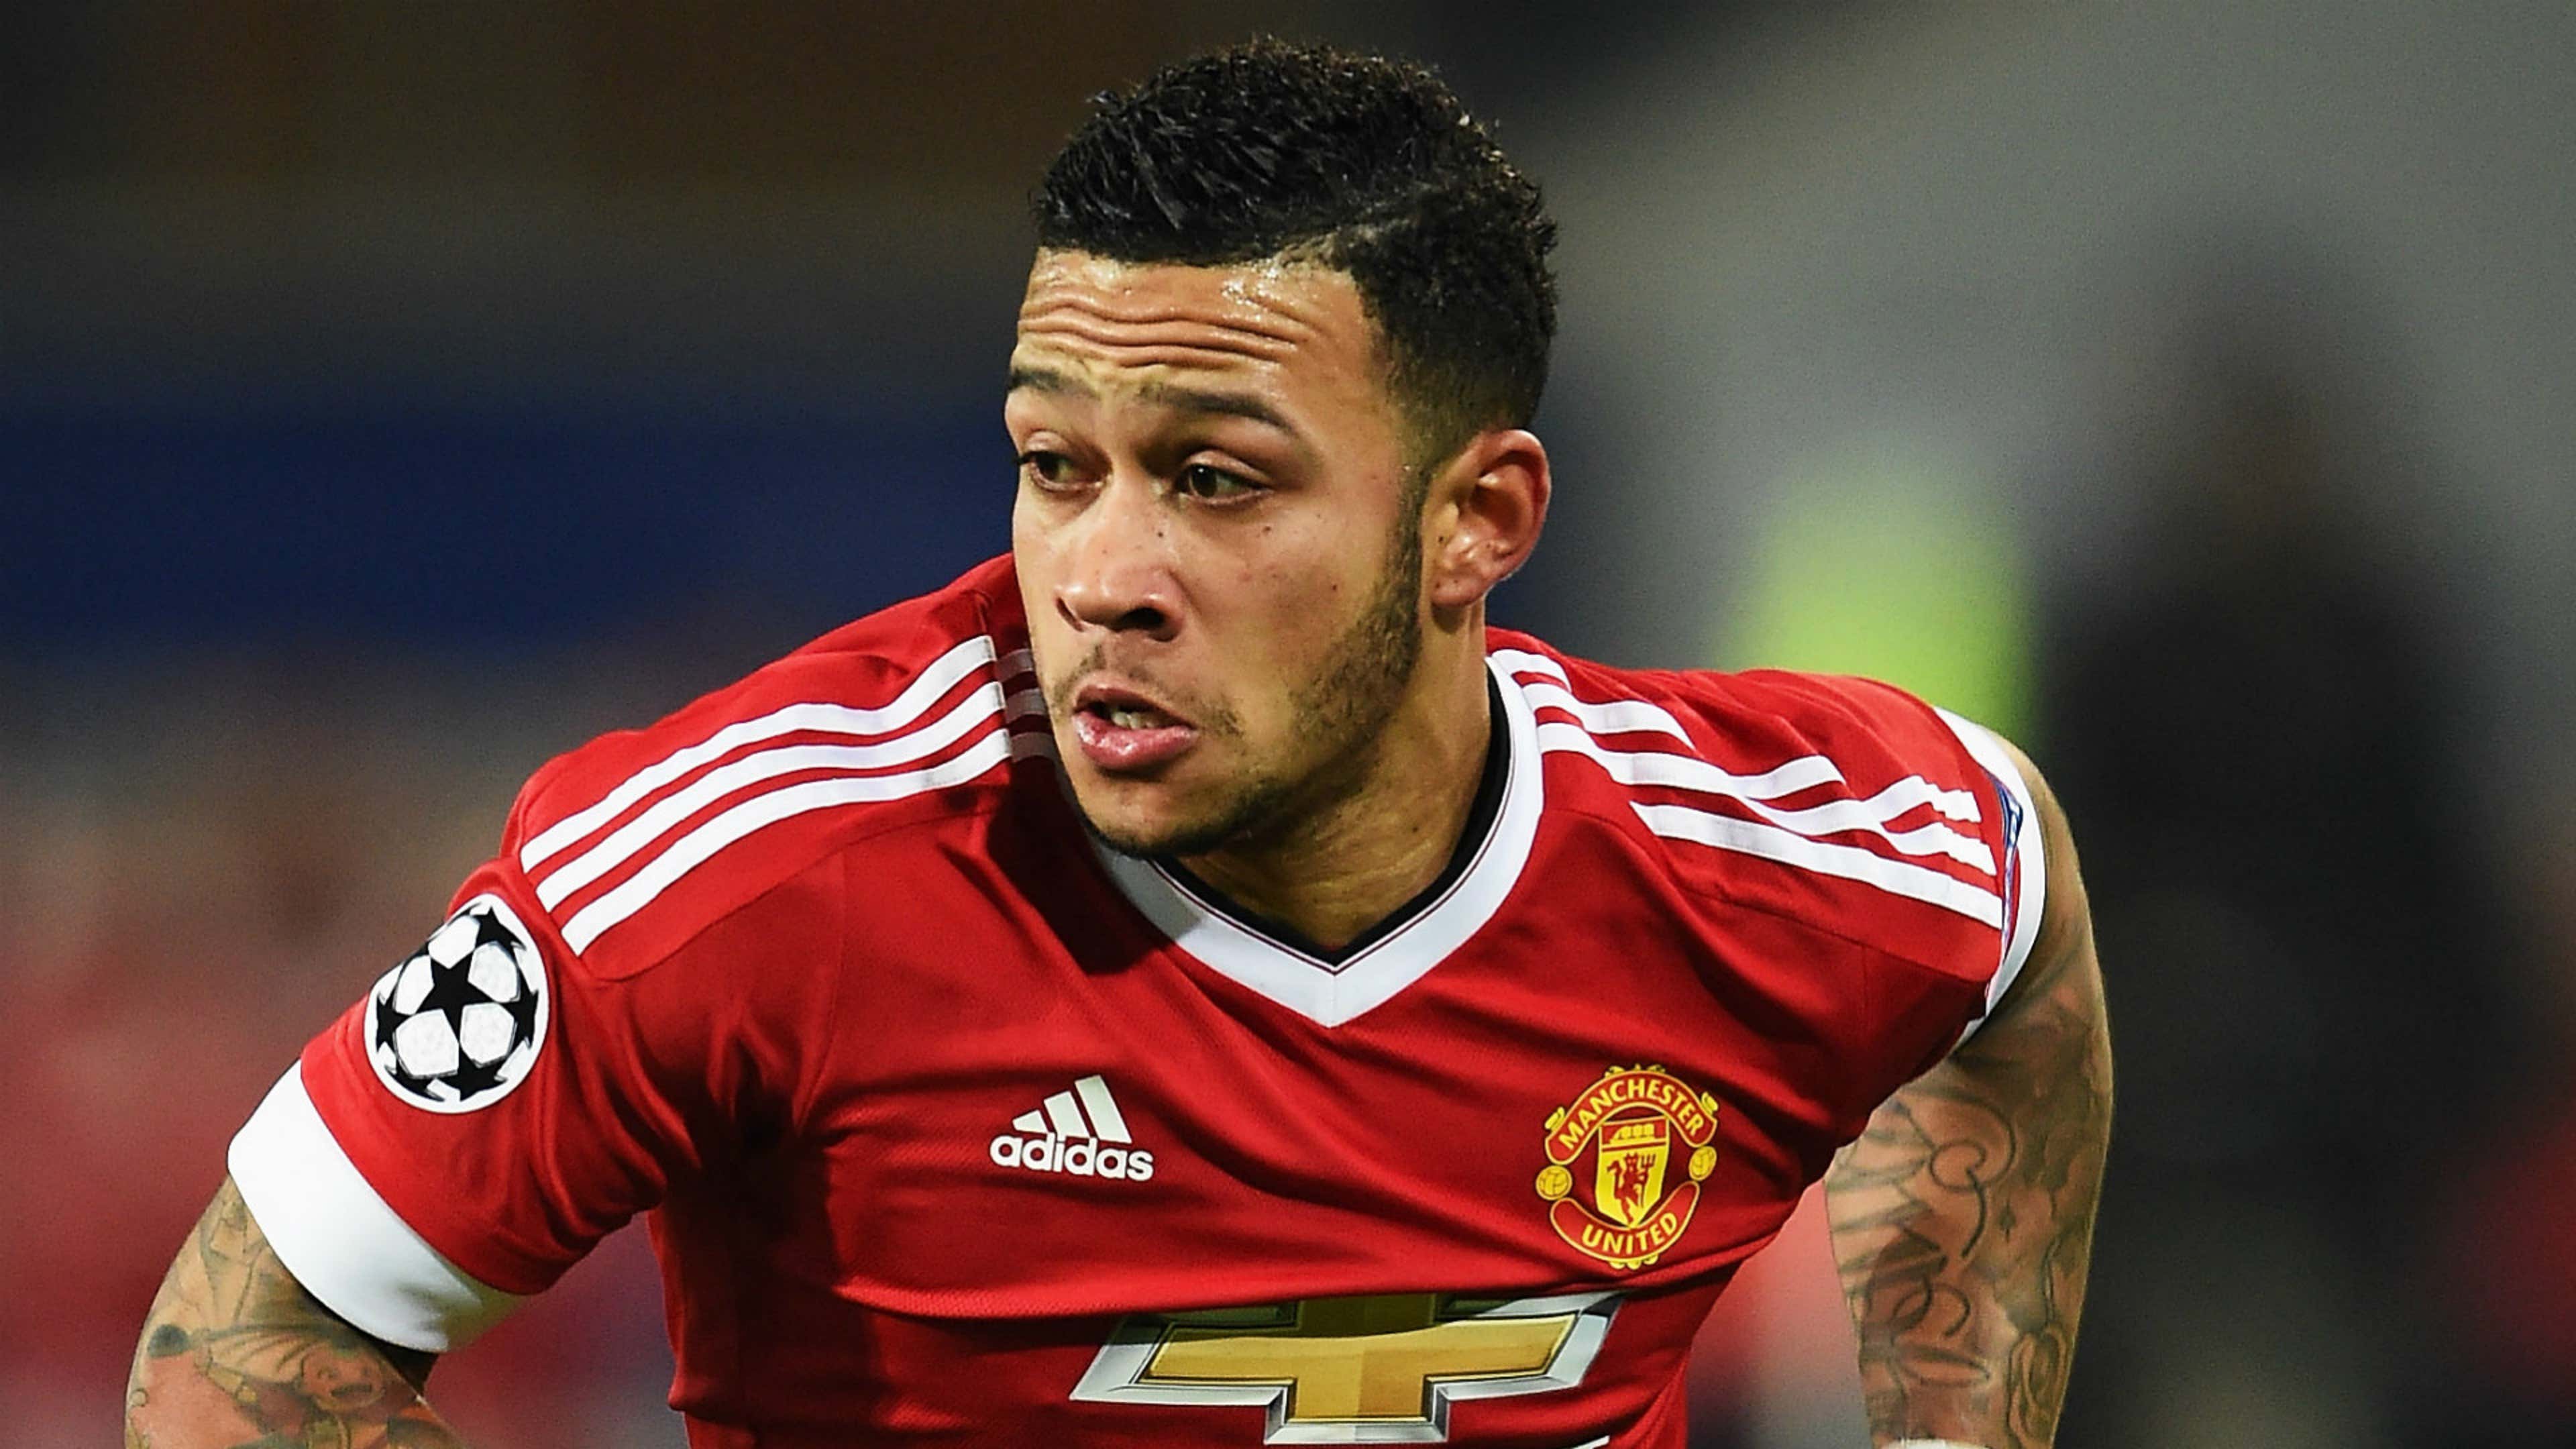 Memphis Depay handed Manchester United No 7 shirt